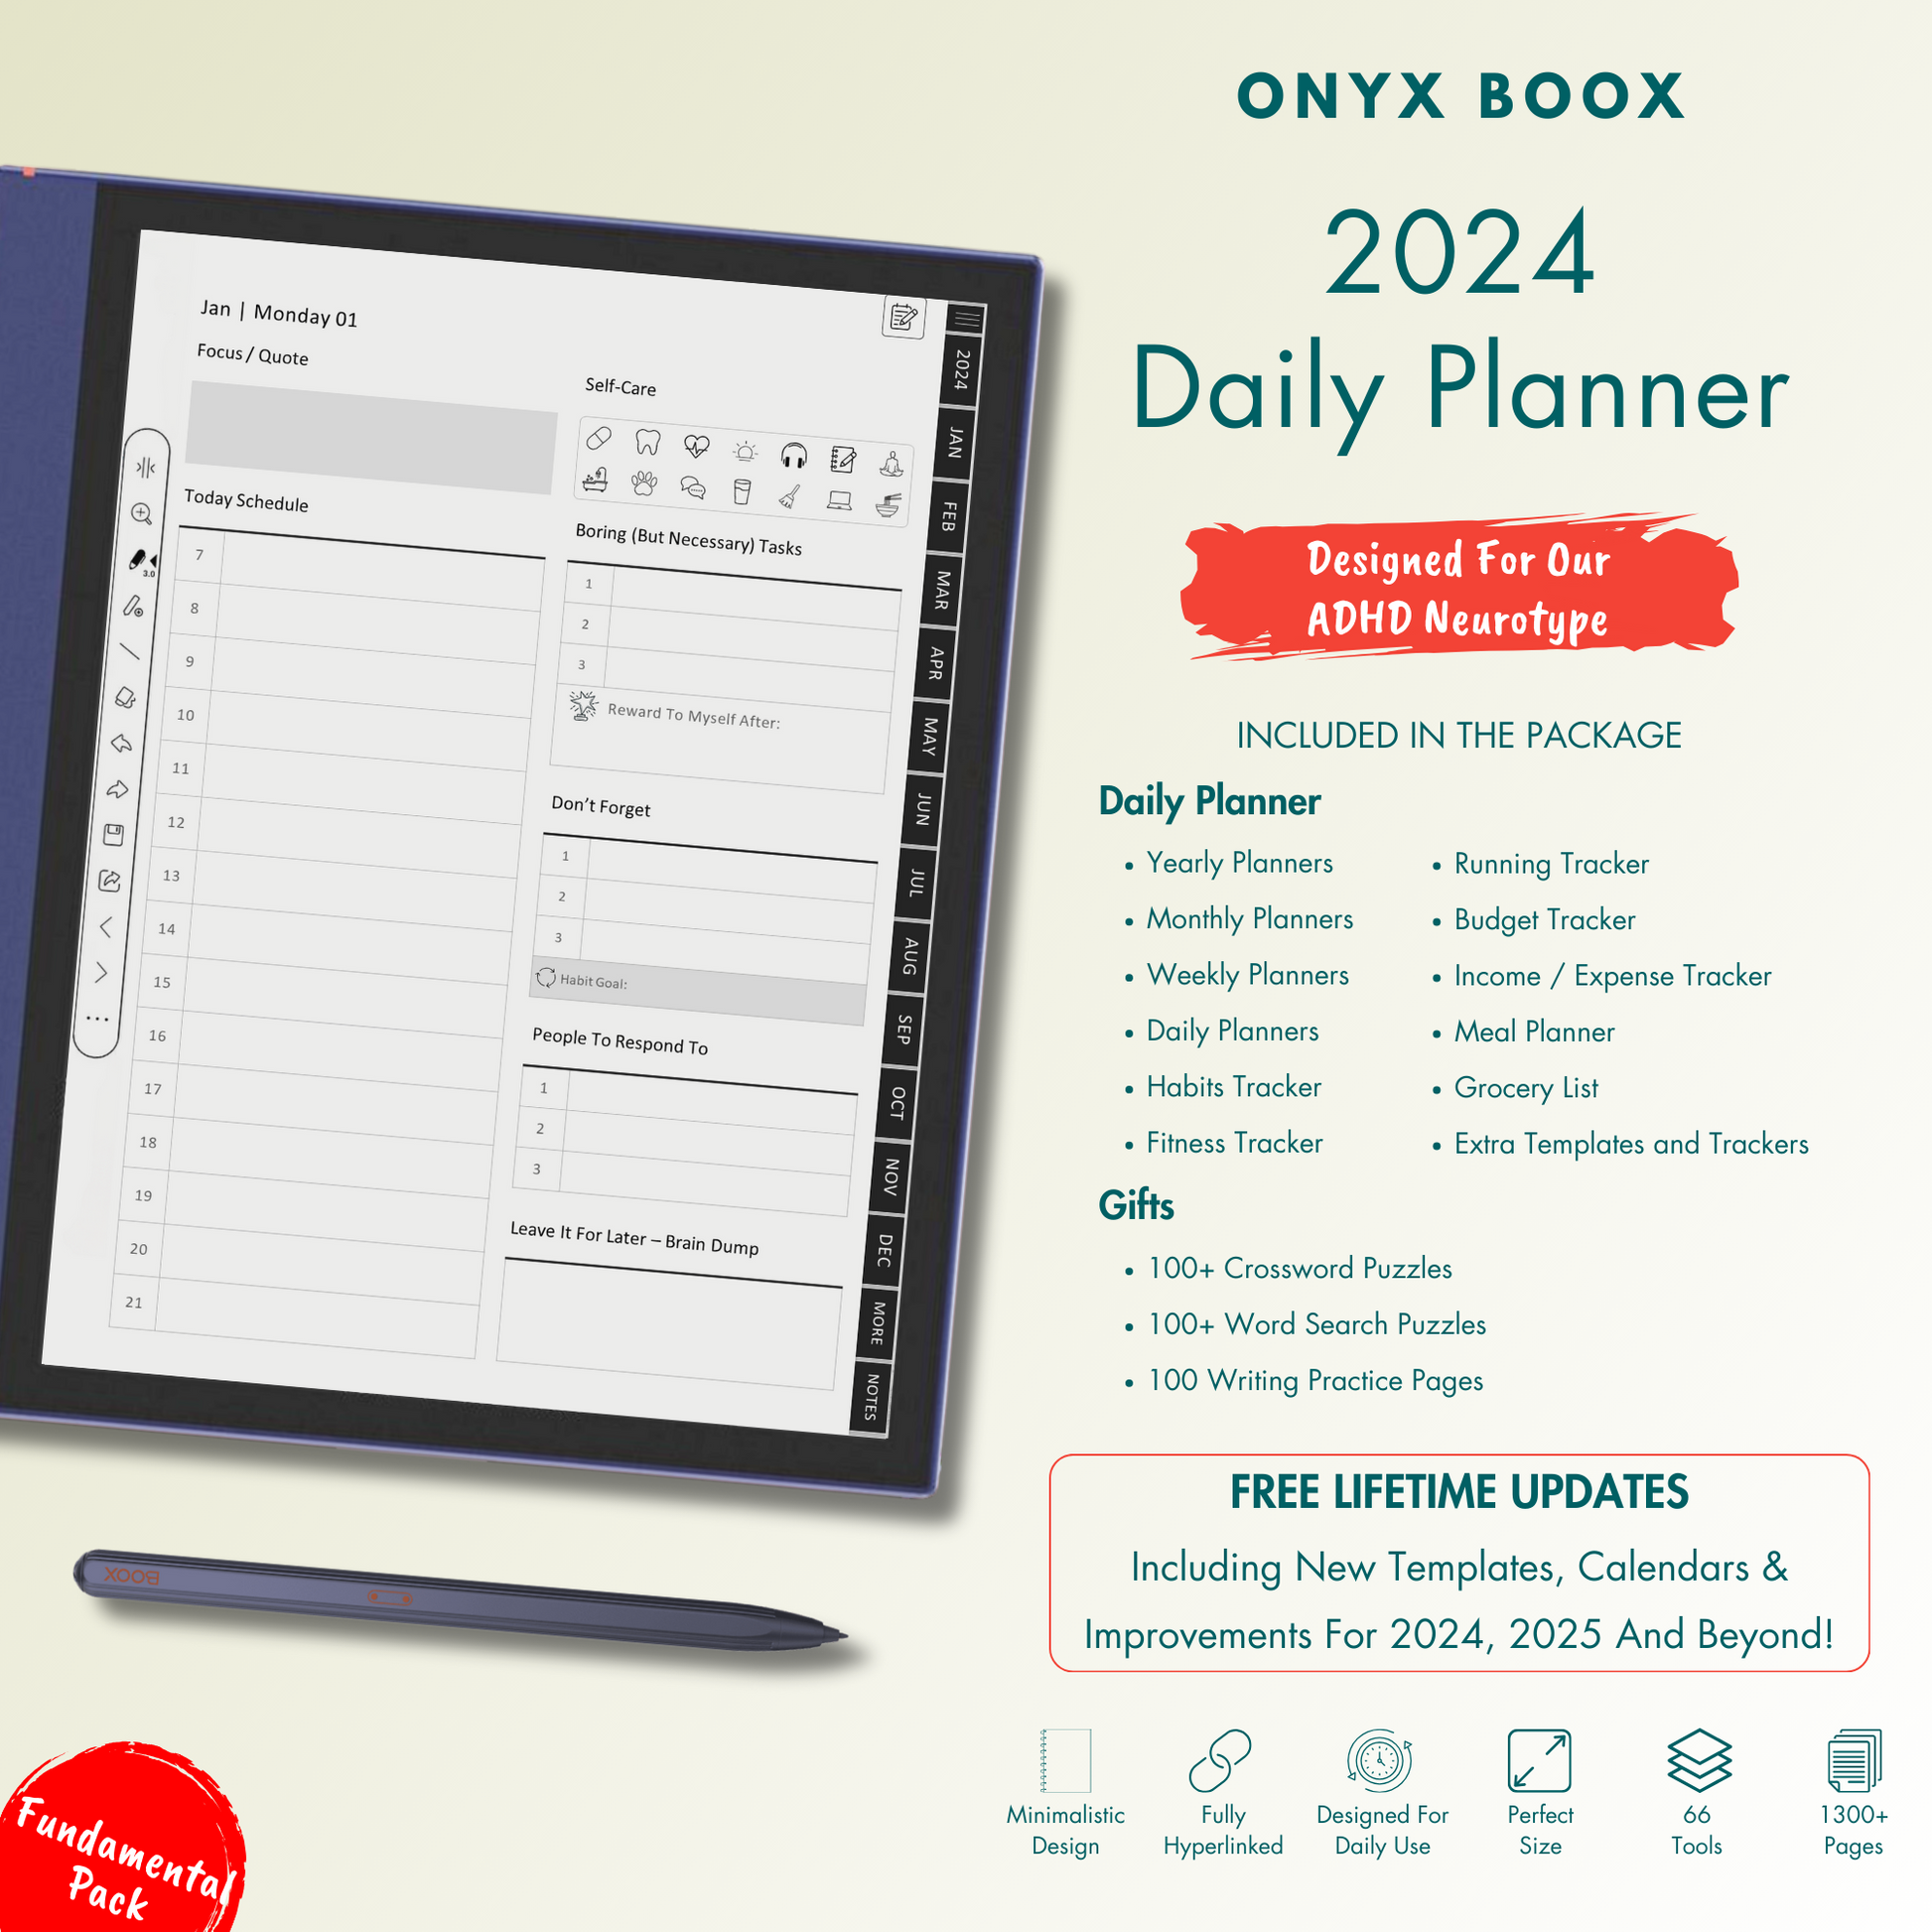 Daily Planner 2024 for Onyx Boox.